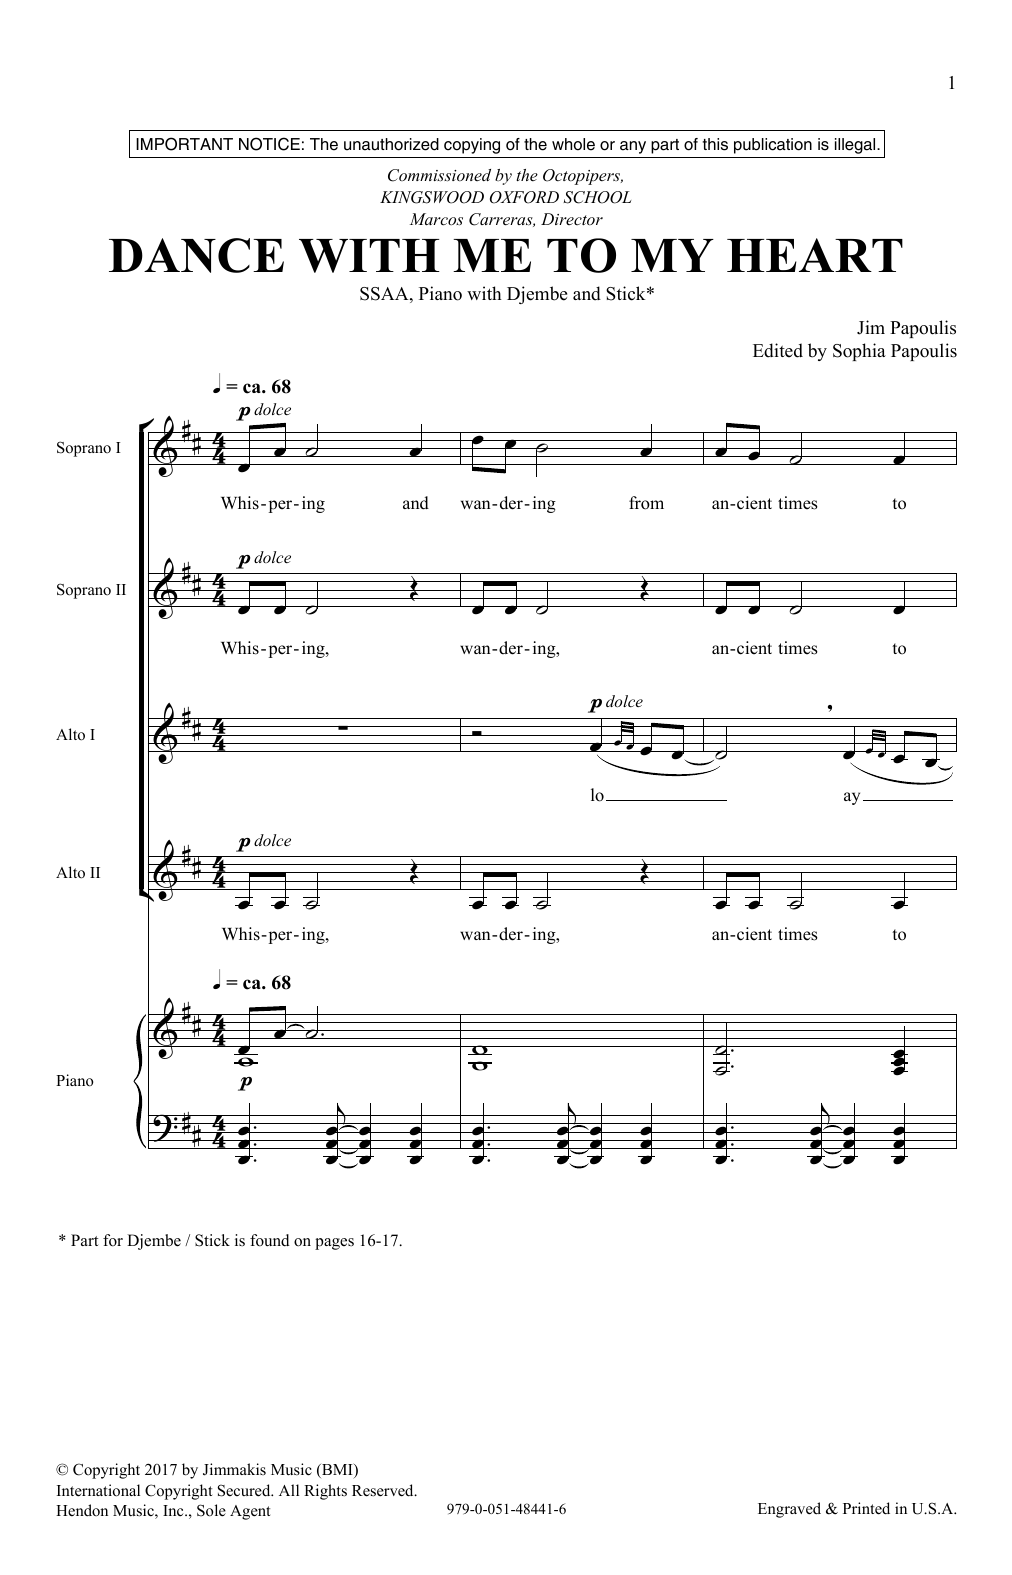 Download Jim Papoulis Dance With Me To My Heart Sheet Music